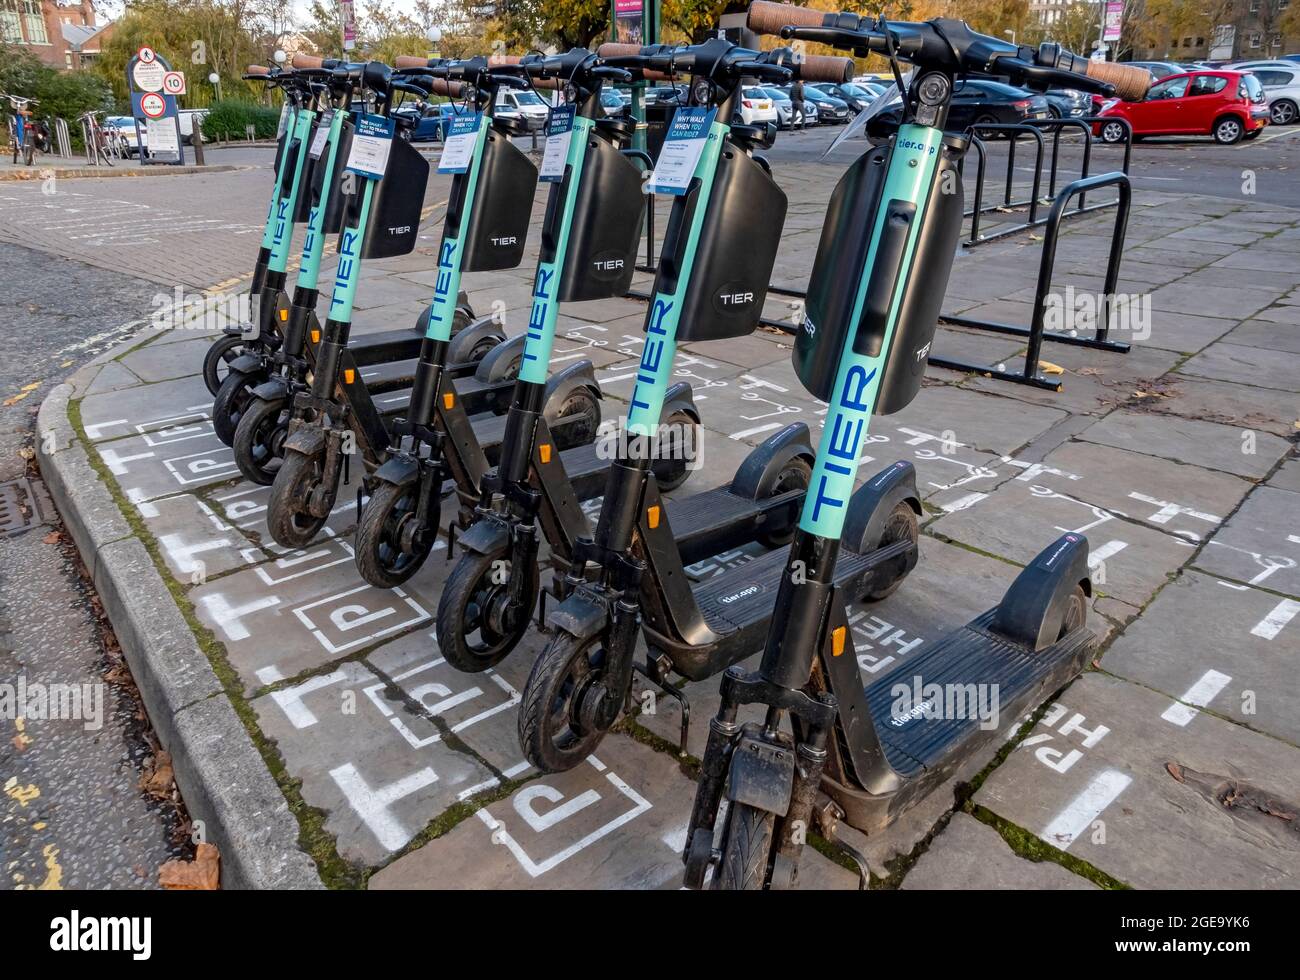 TIER E-scooters for hire in city centre. Stock Photo